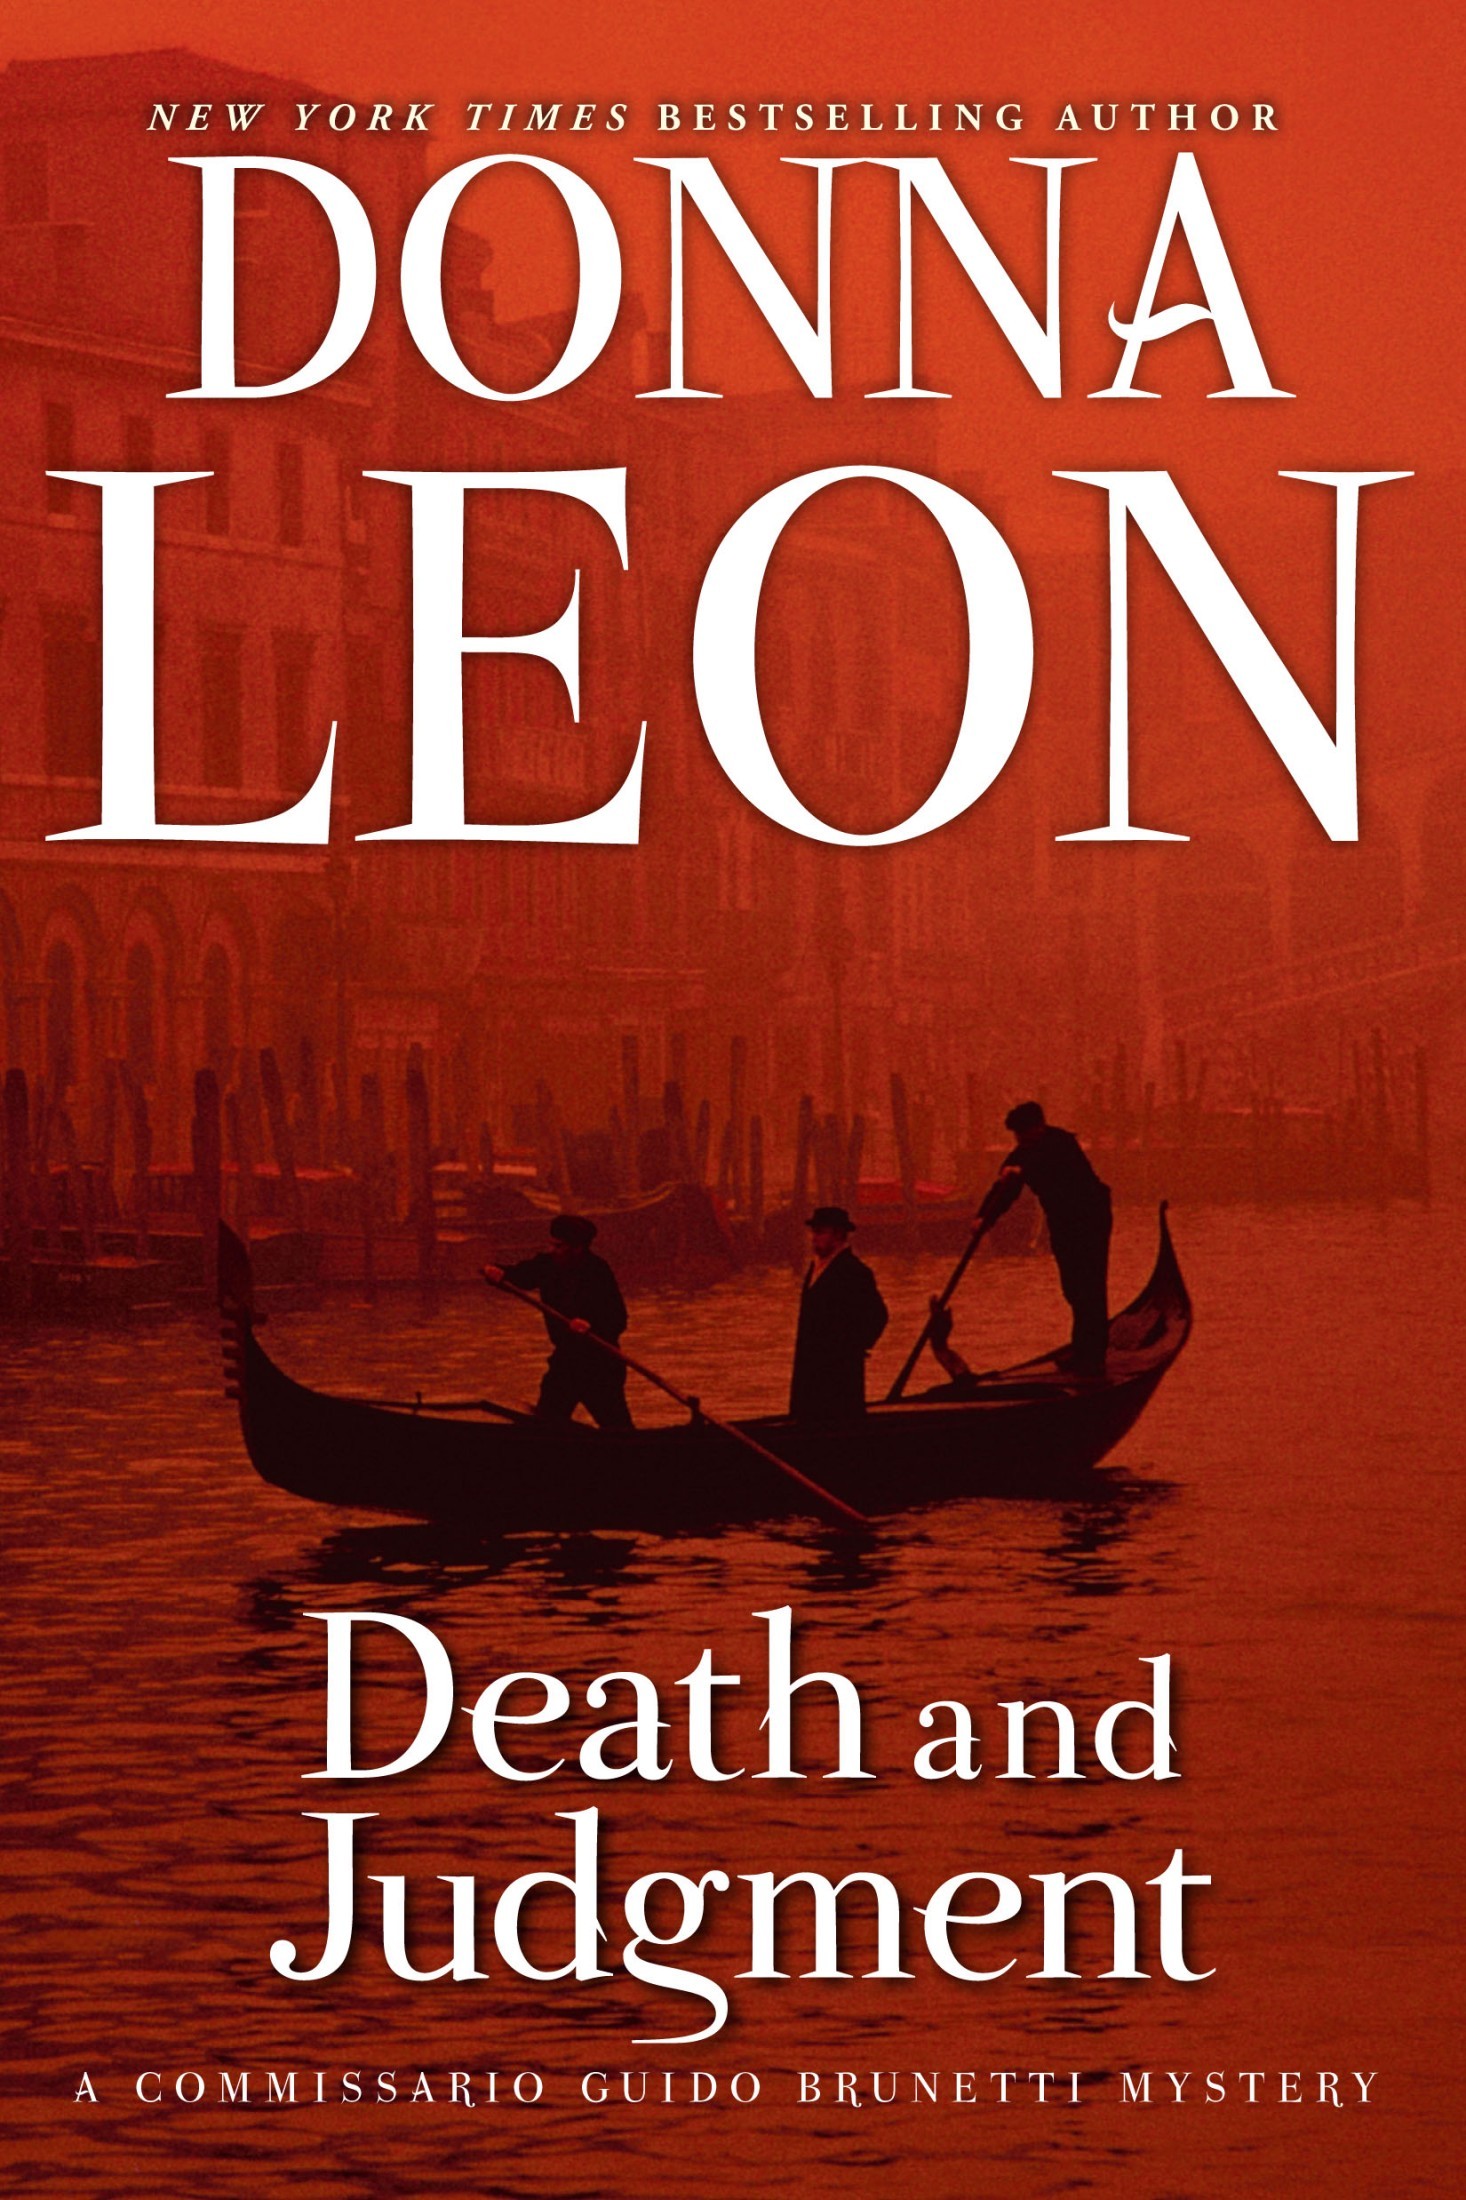 Death and Judgment: A Commissario Guido Brunetti Mystery